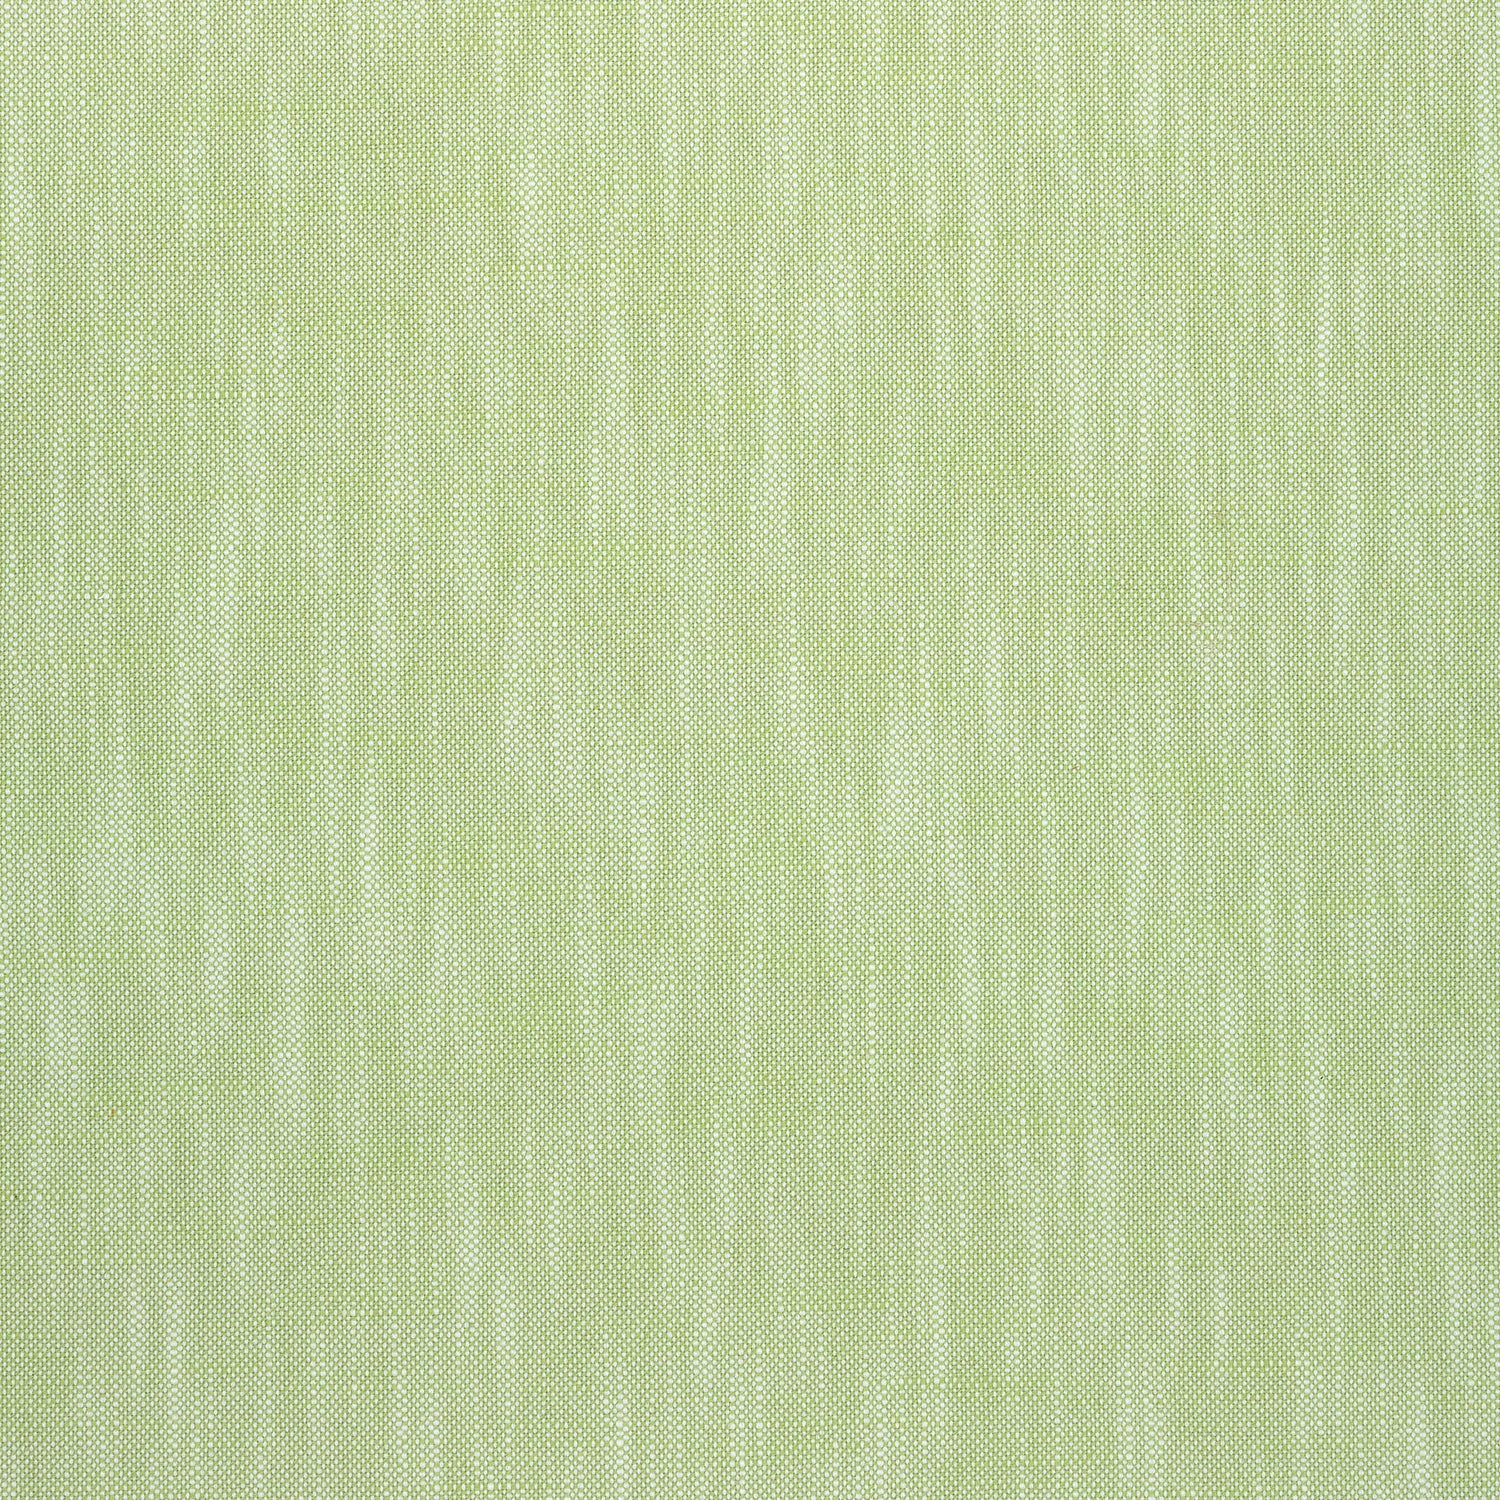 Bristol fabric in green apple color - pattern number W73410 - by Thibaut in the Landmark Textures collection